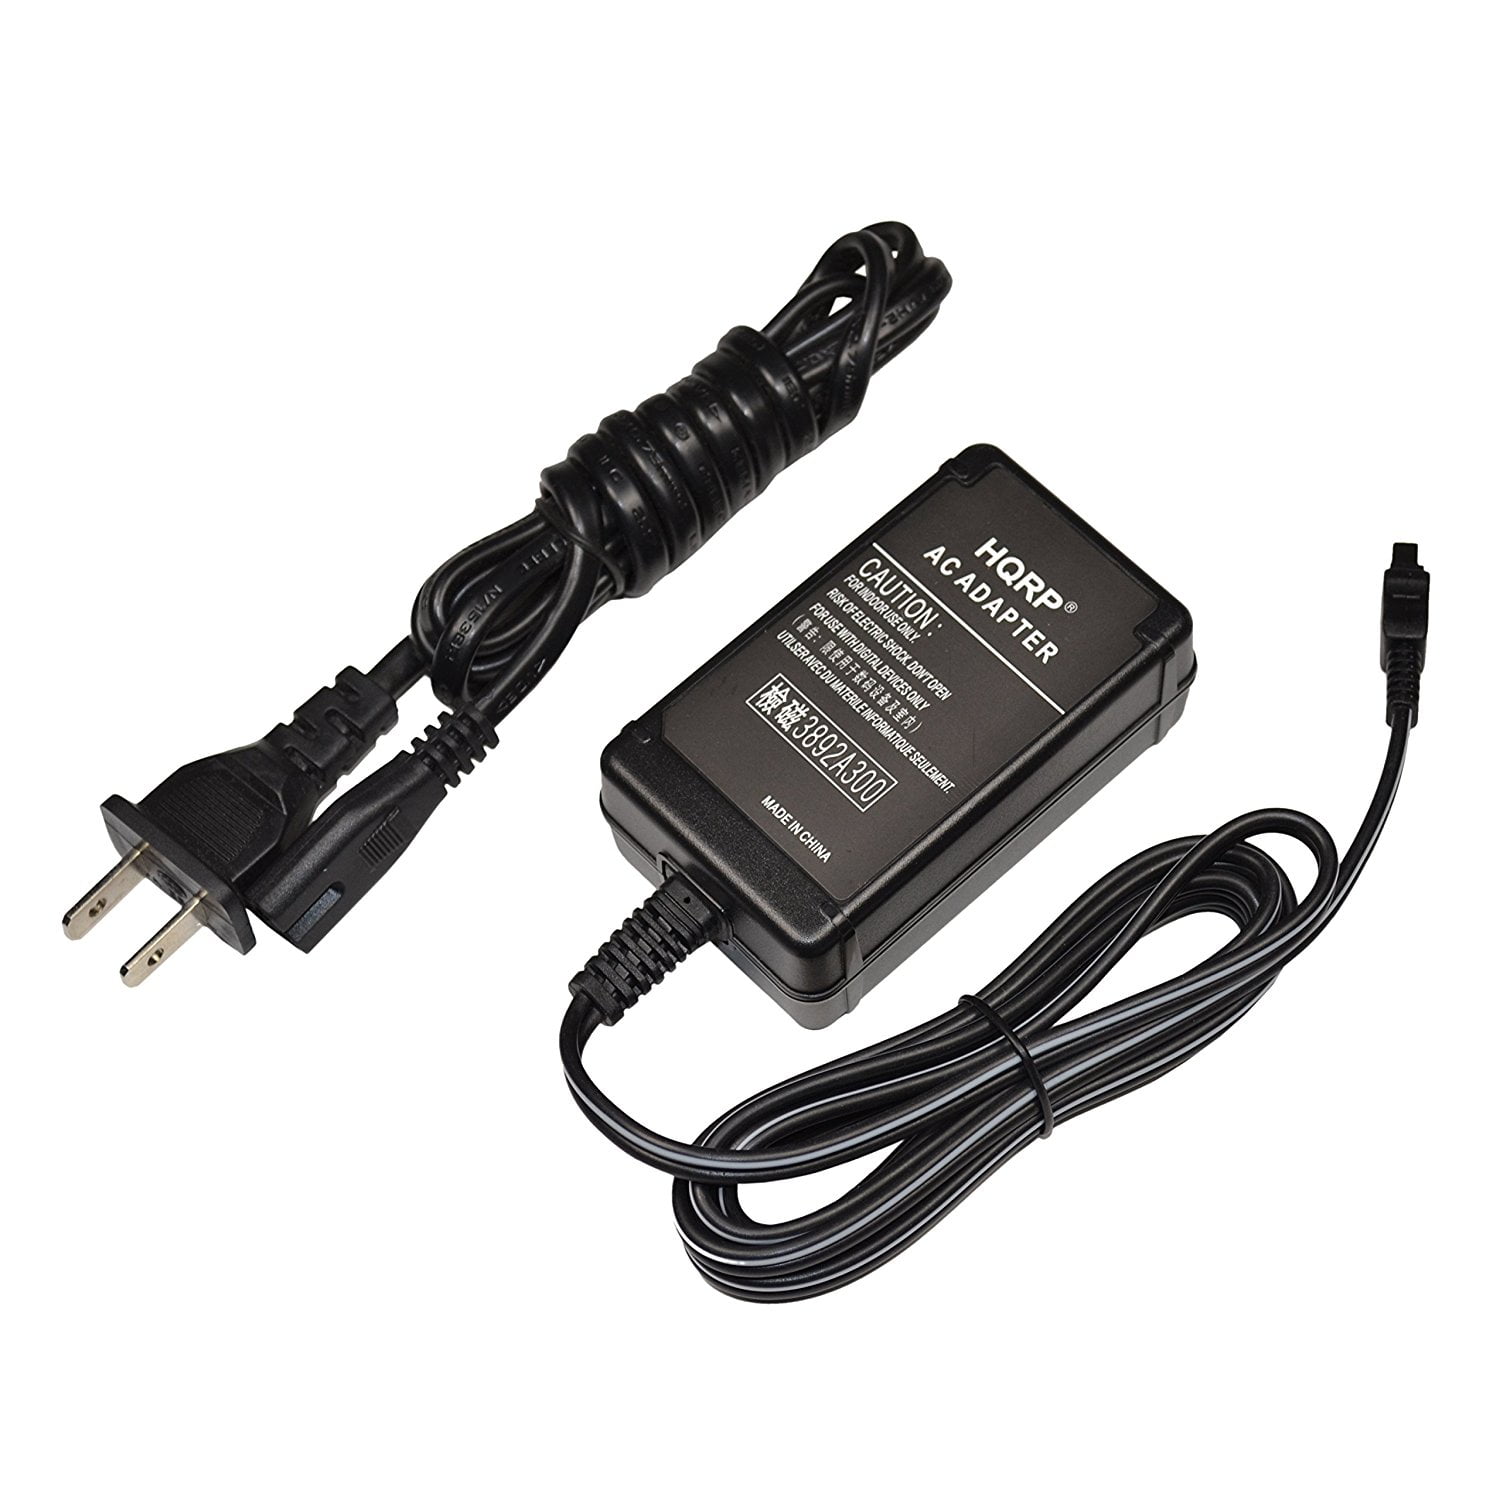 Sony HandyCam Camcorder HDR-SR10E power supply cord cable AC DC adapter charger 